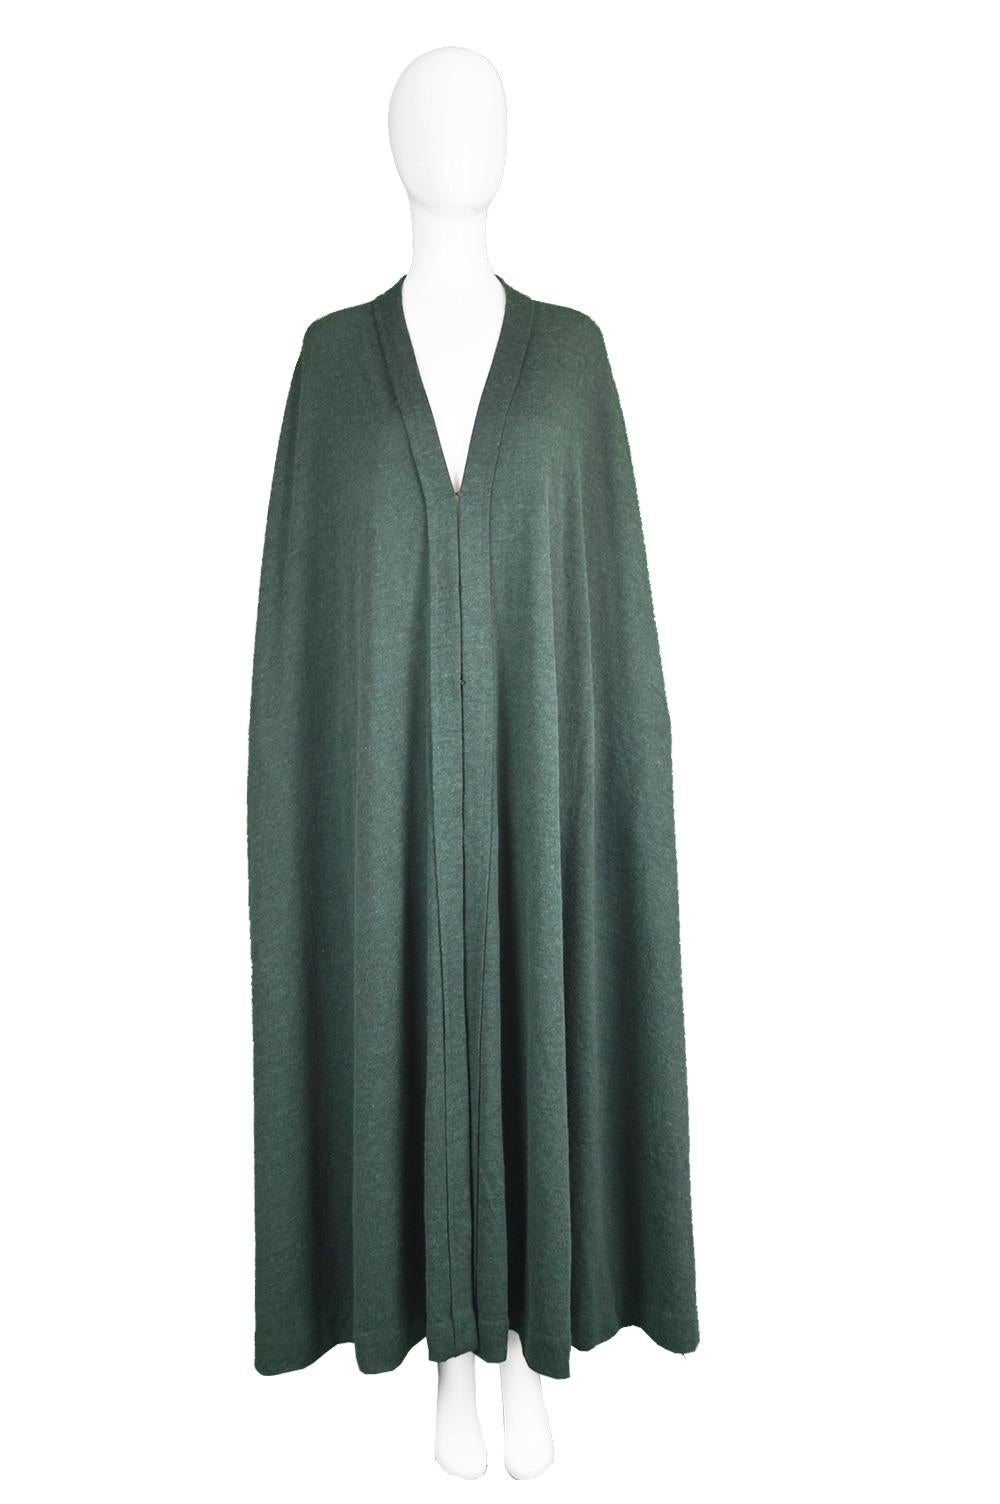 Lanvin Haute Couture Unstructured Green Wool Knit Maxi Cape Cloak, 1970s

Click 'CONTINUE READING' below to see size & description. 

Size: One Size fits most. 
Bust - Free
Waist - Free
Hips - Free
Length (Shoulder to Hem) - 52” / 132cm

Condition: